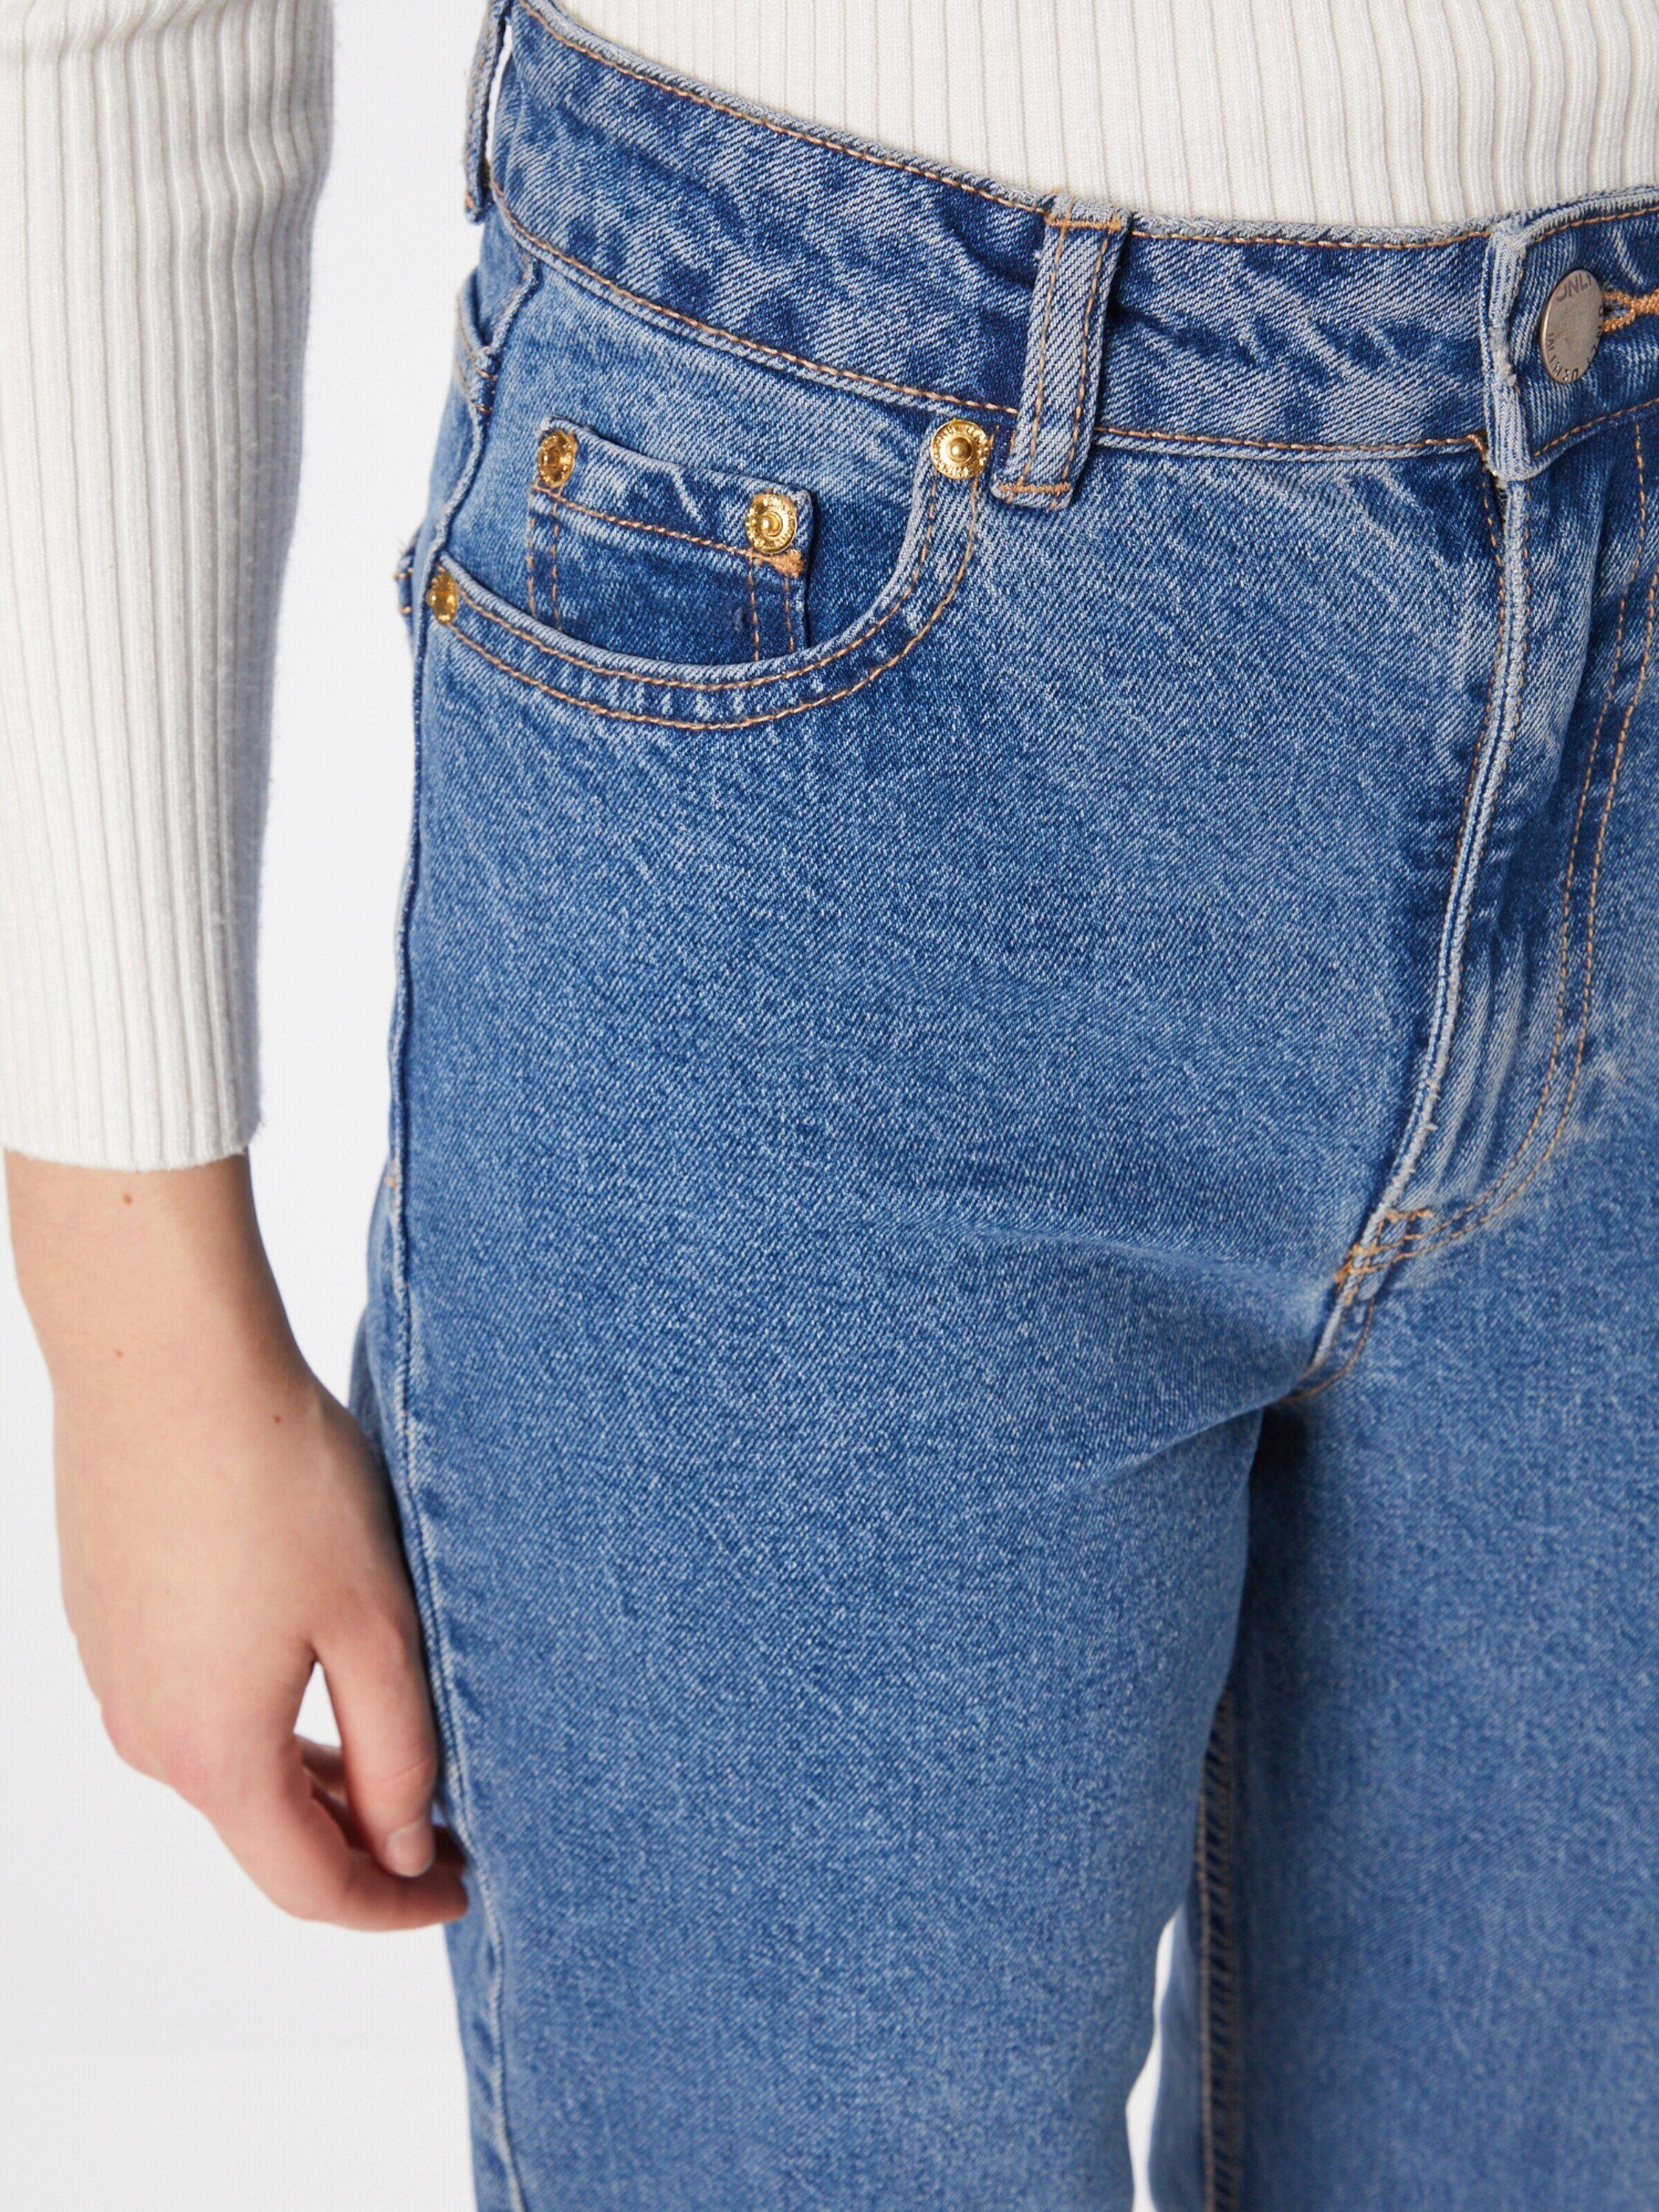 Weite Plain/ohne Weiteres ONLY Jeans Detail (1-tlg) Camille Details,